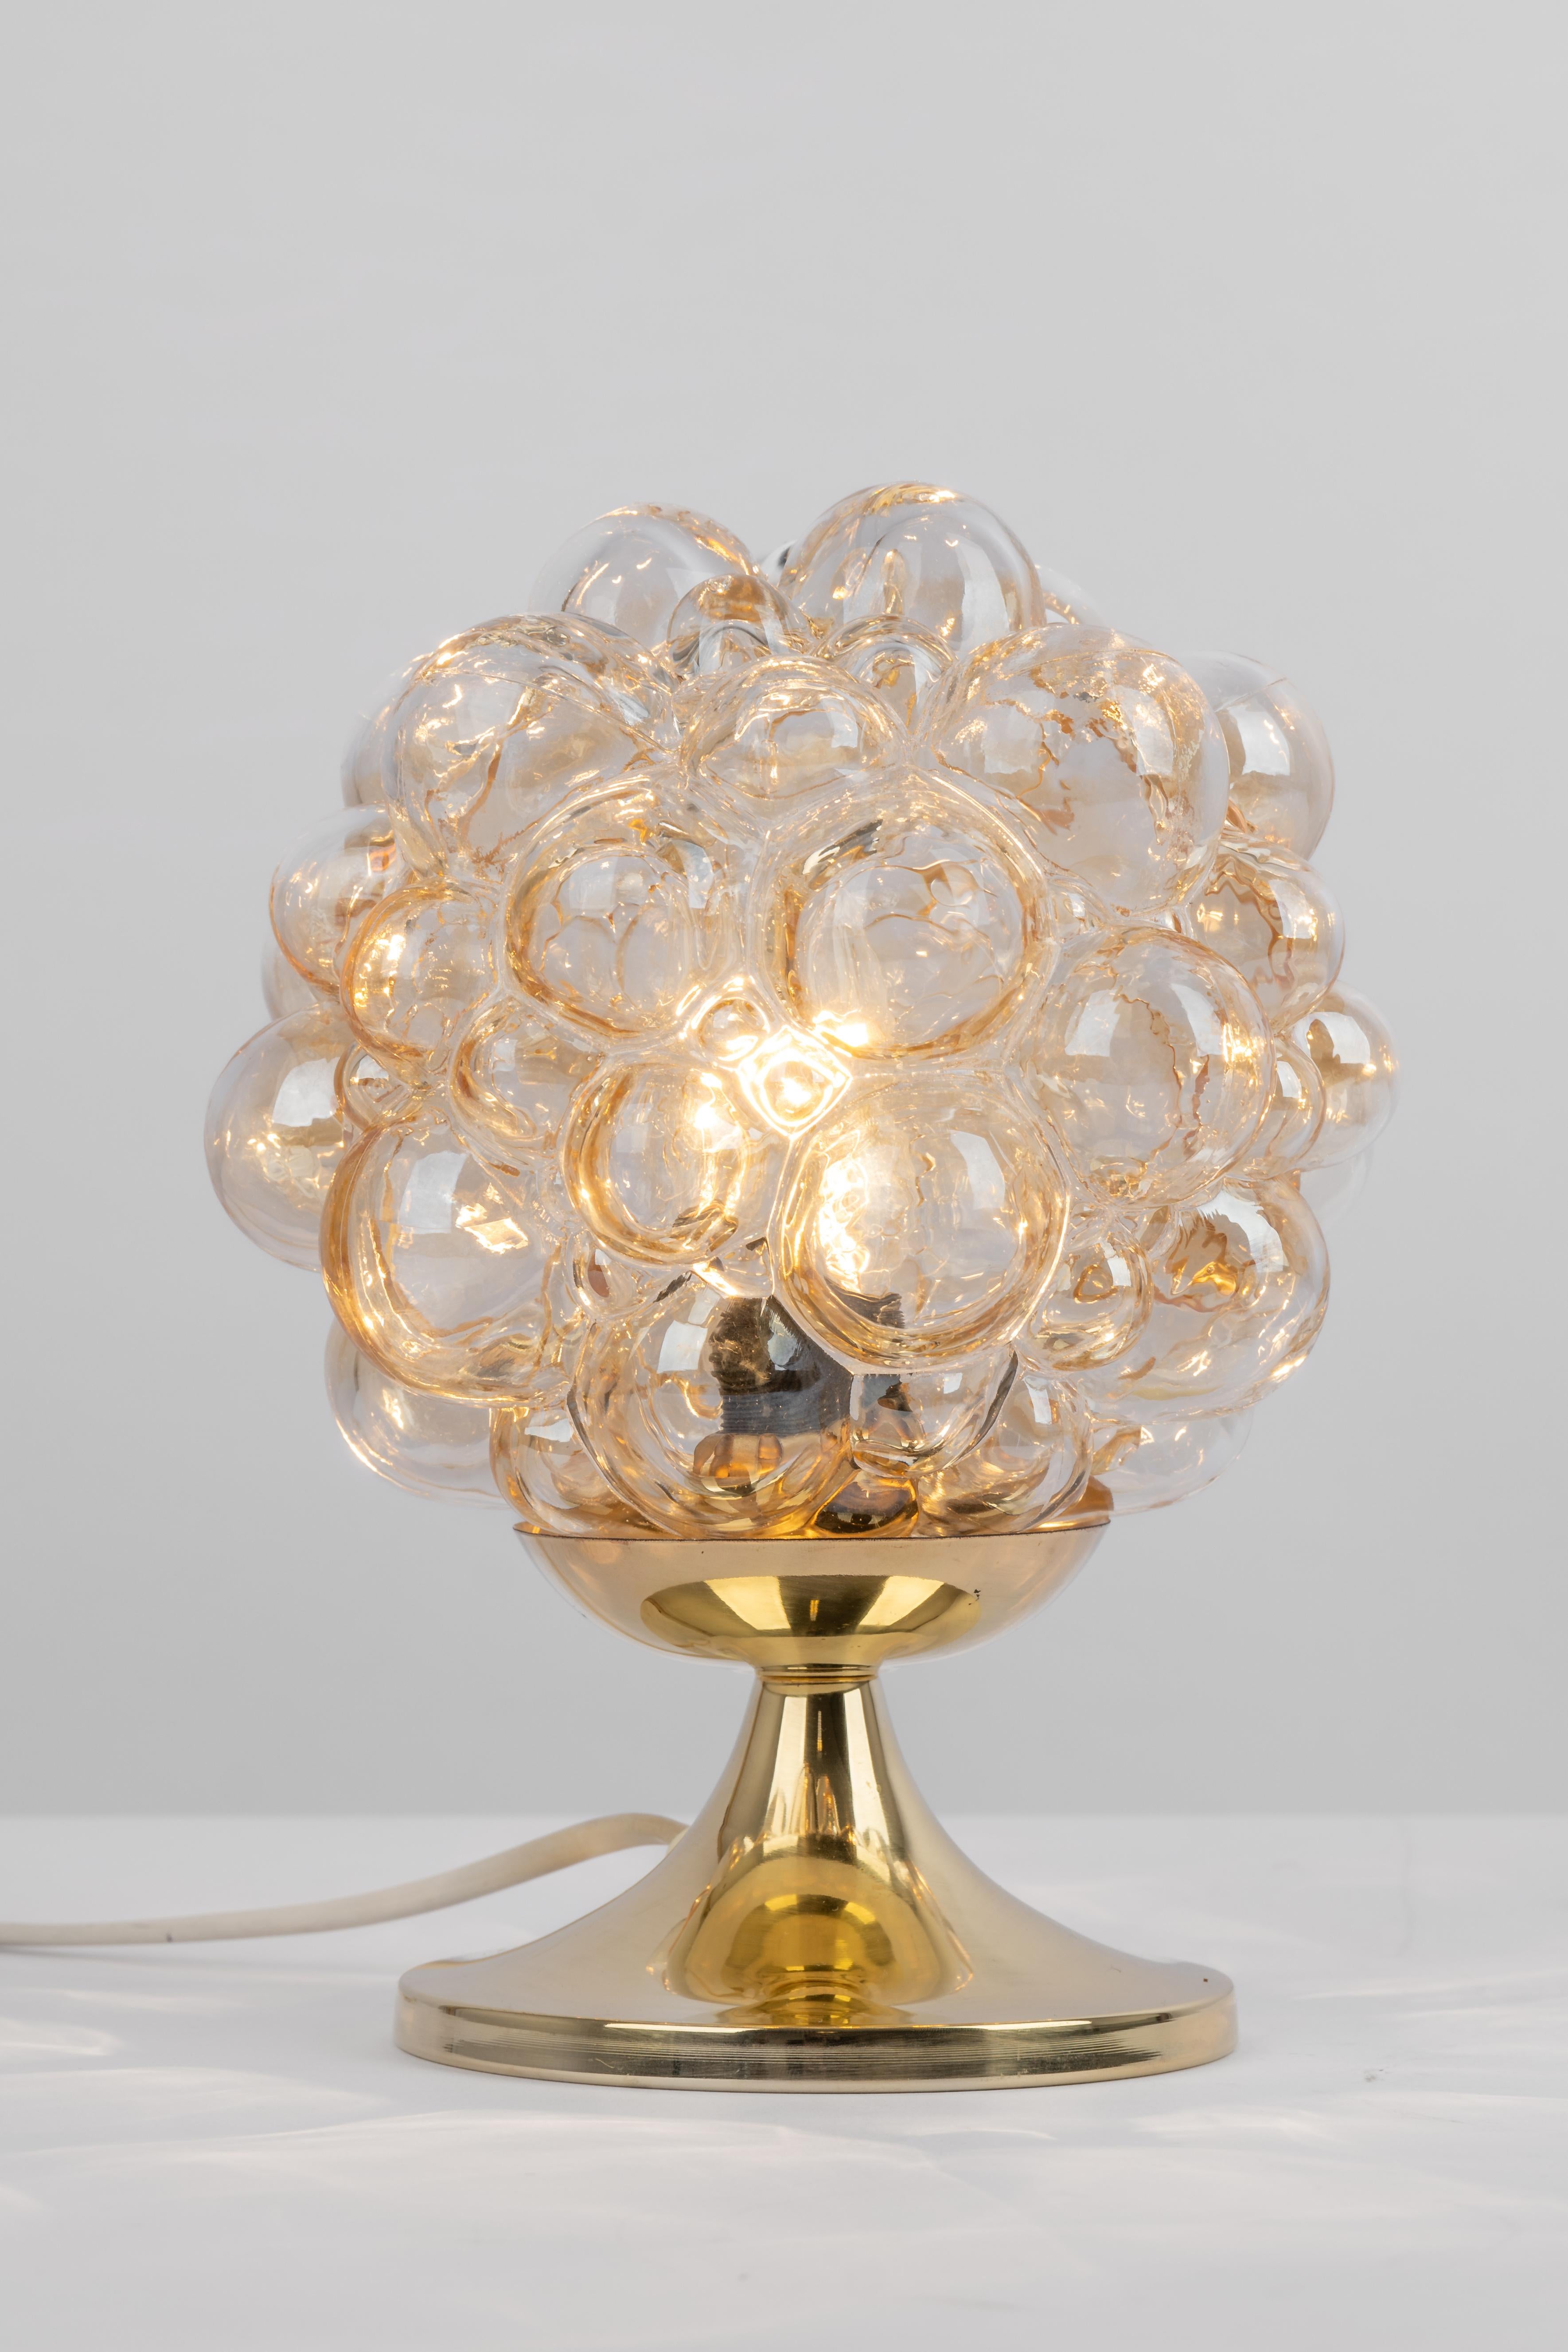 One of two amber bubble glass table lights made in Germany.
Very good condition. Cleaned, well-wired and ready to use. 
Wonderful light effect.

Each lamp requires 1 x E14 small bulbs with 40W max each.
Light bulbs are not included. It is possible